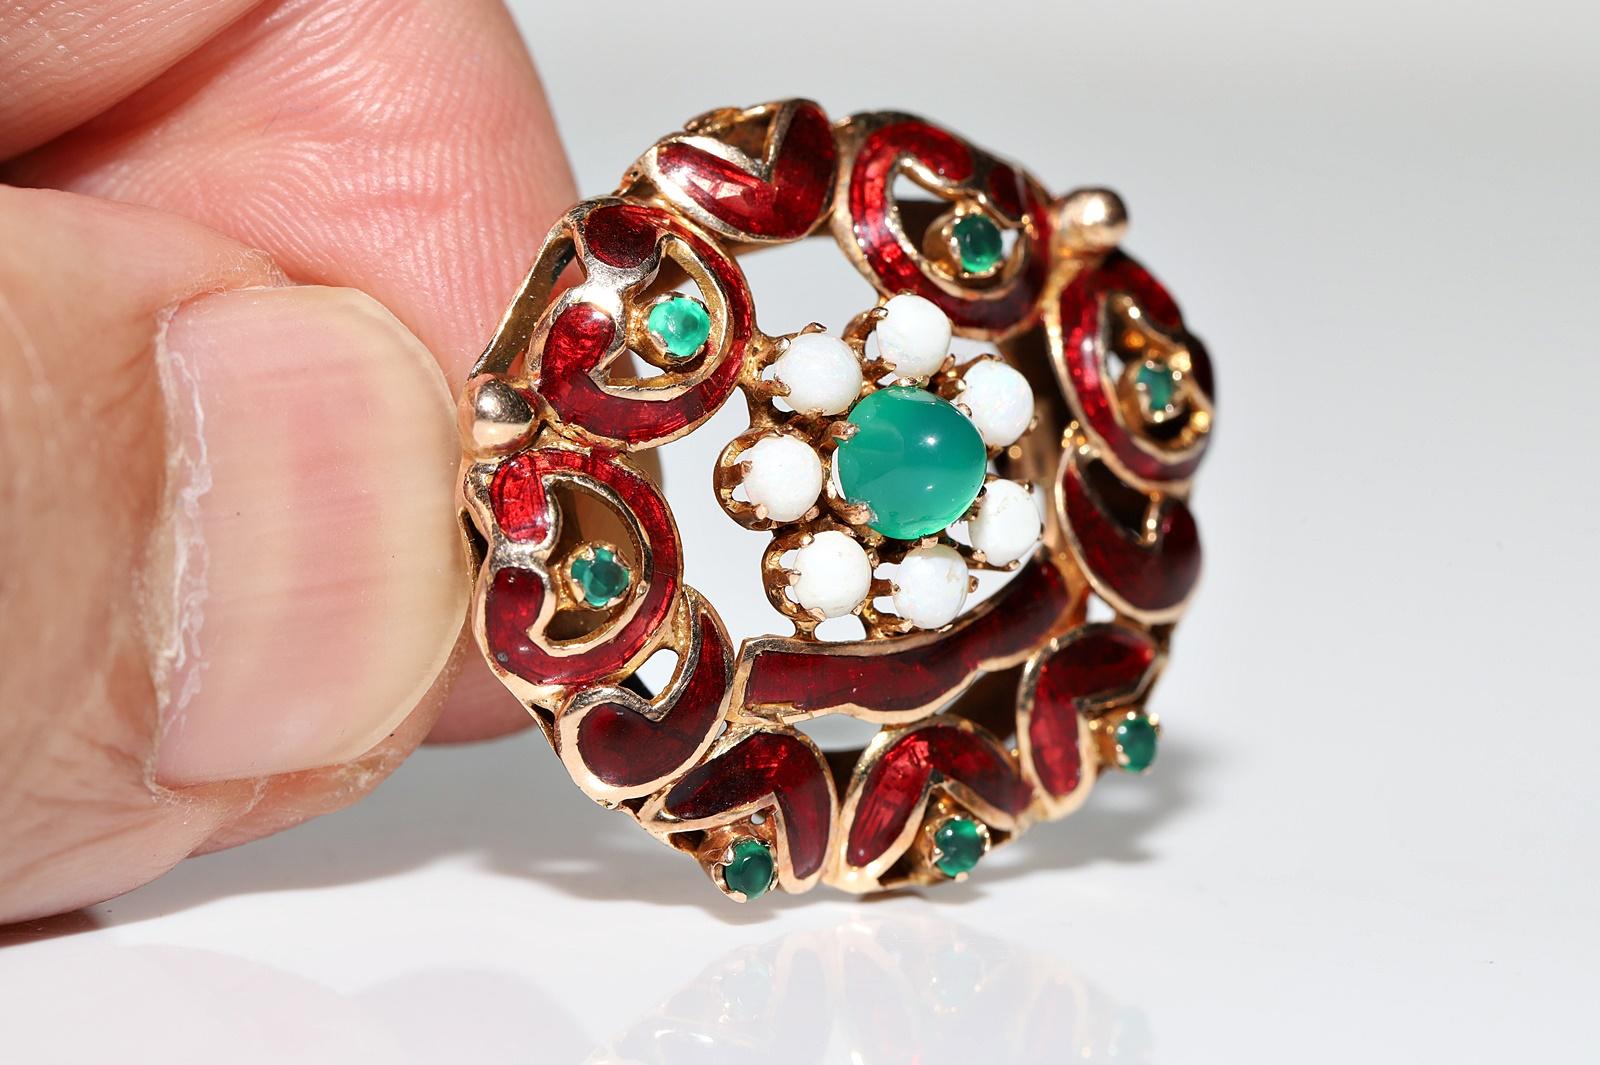 Retro Vintage Circa 1960s 14k Gold Natural Opal And Jade Decorated Enamel Brooch For Sale